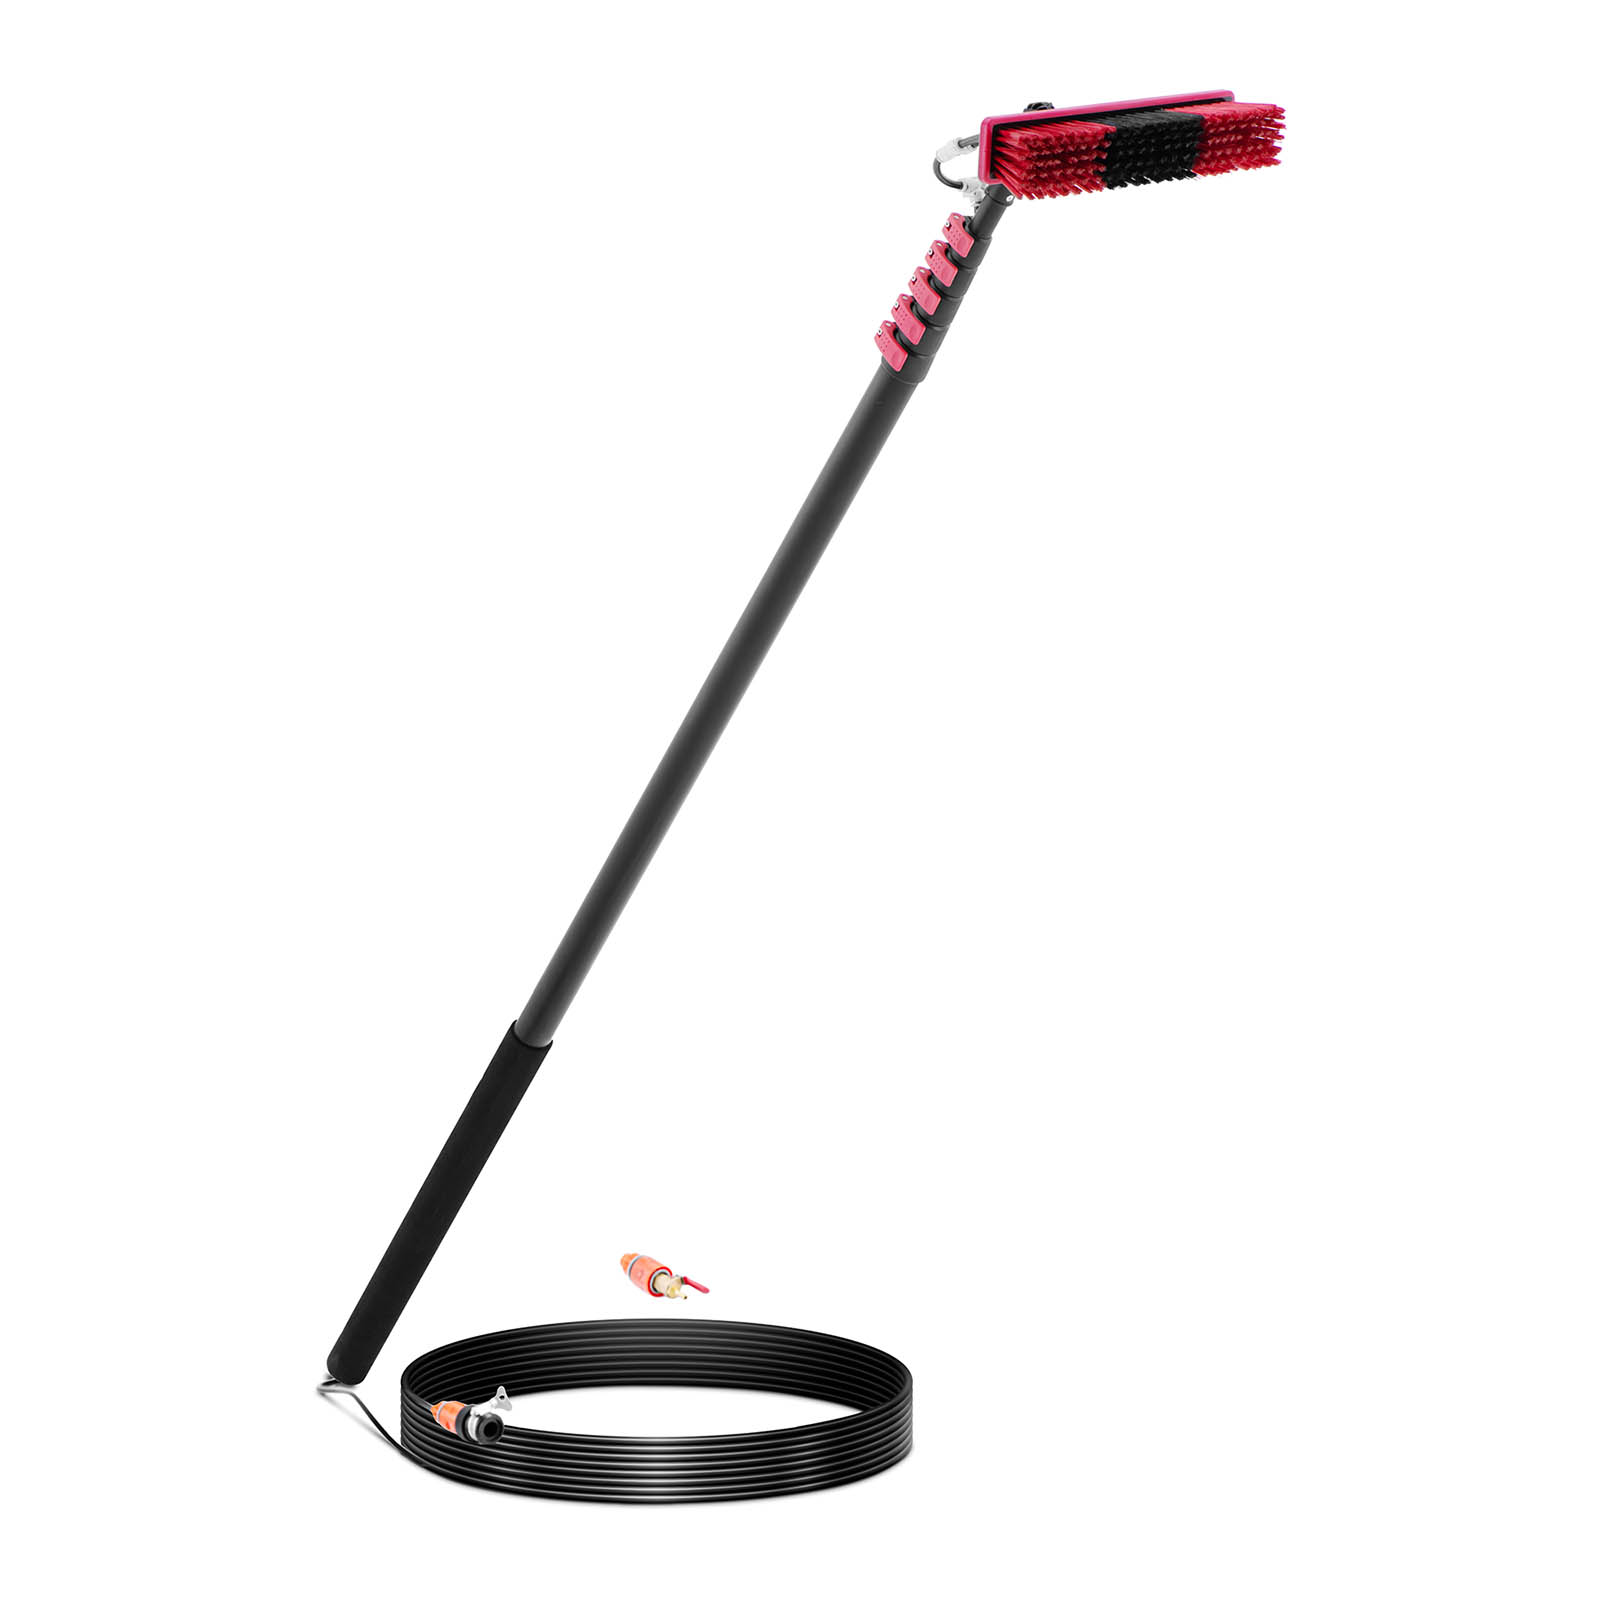 Telescopic Brush - with water connection - for solar panels and windows - 1820 - 8900 mm